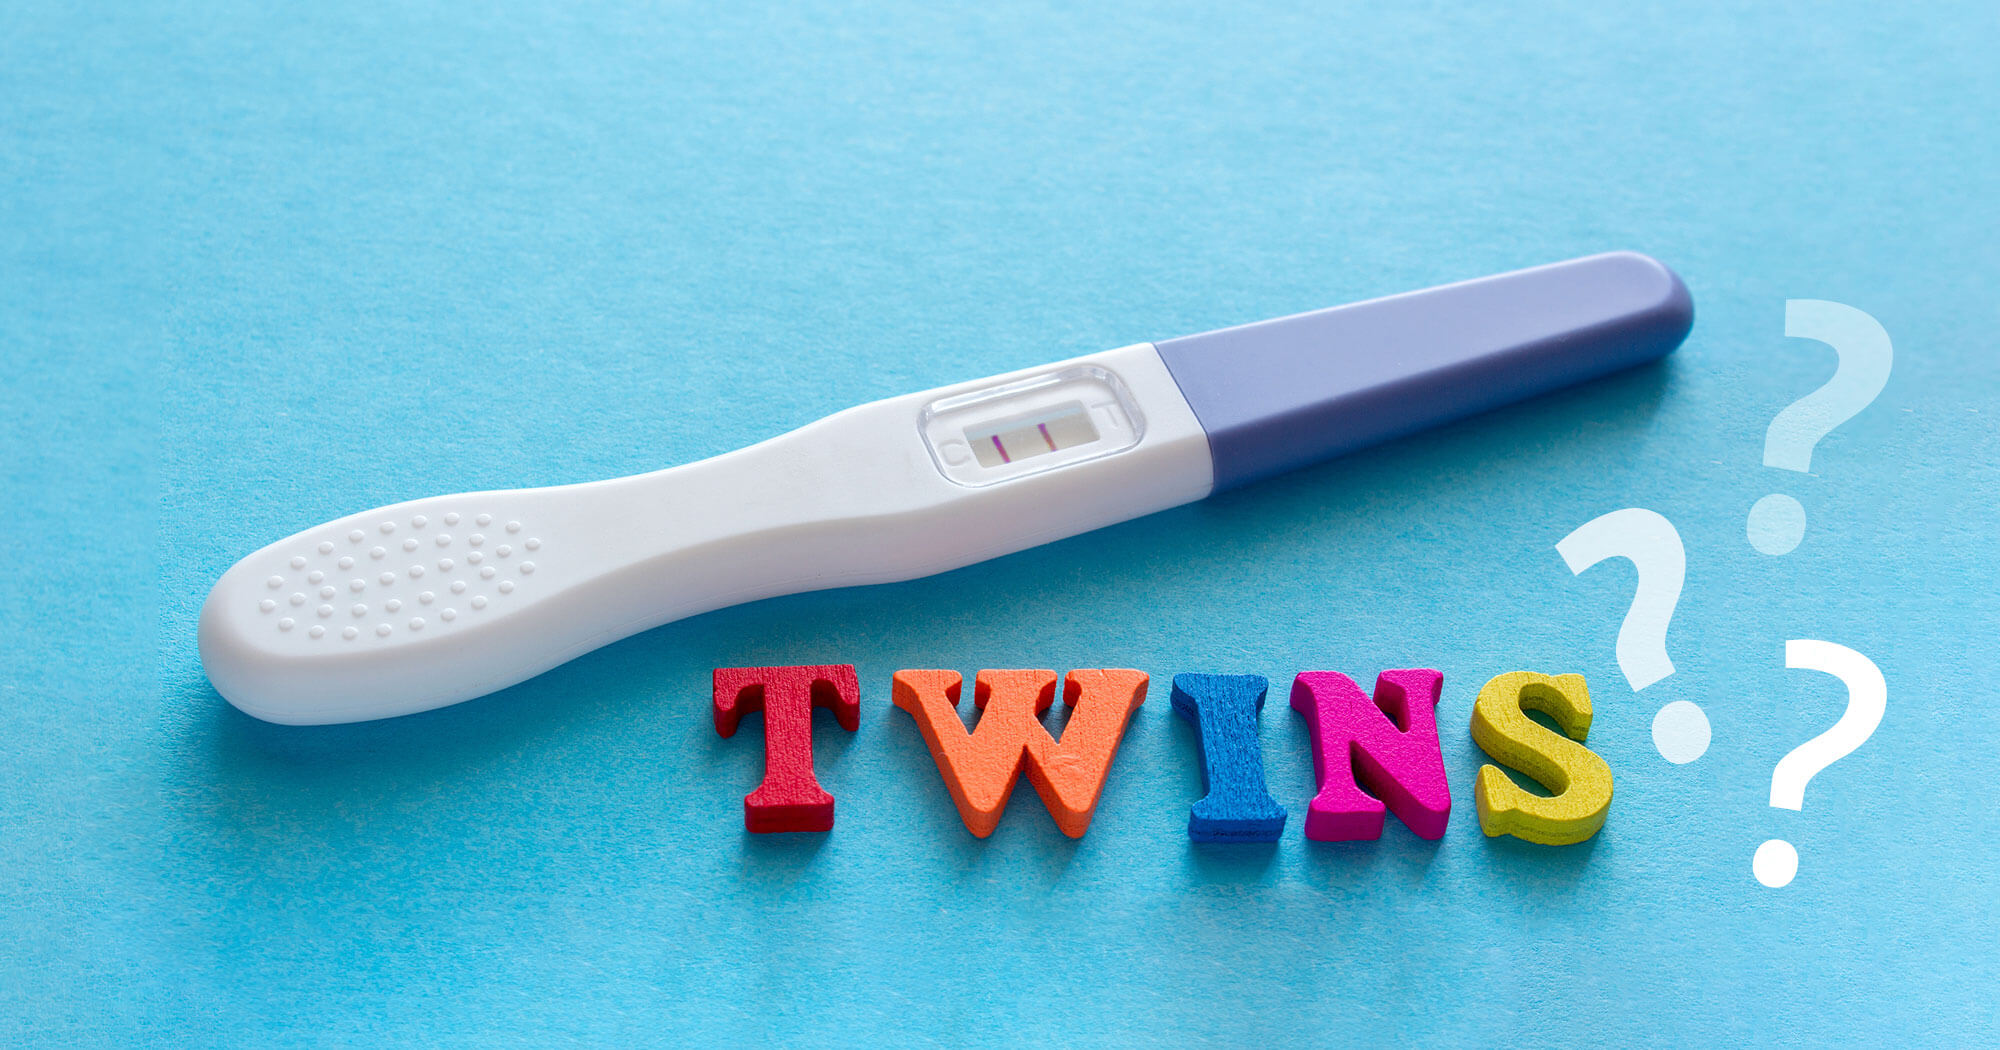 Twin Pregnancy: 10 Weird Signs You're Carrying Two Babies